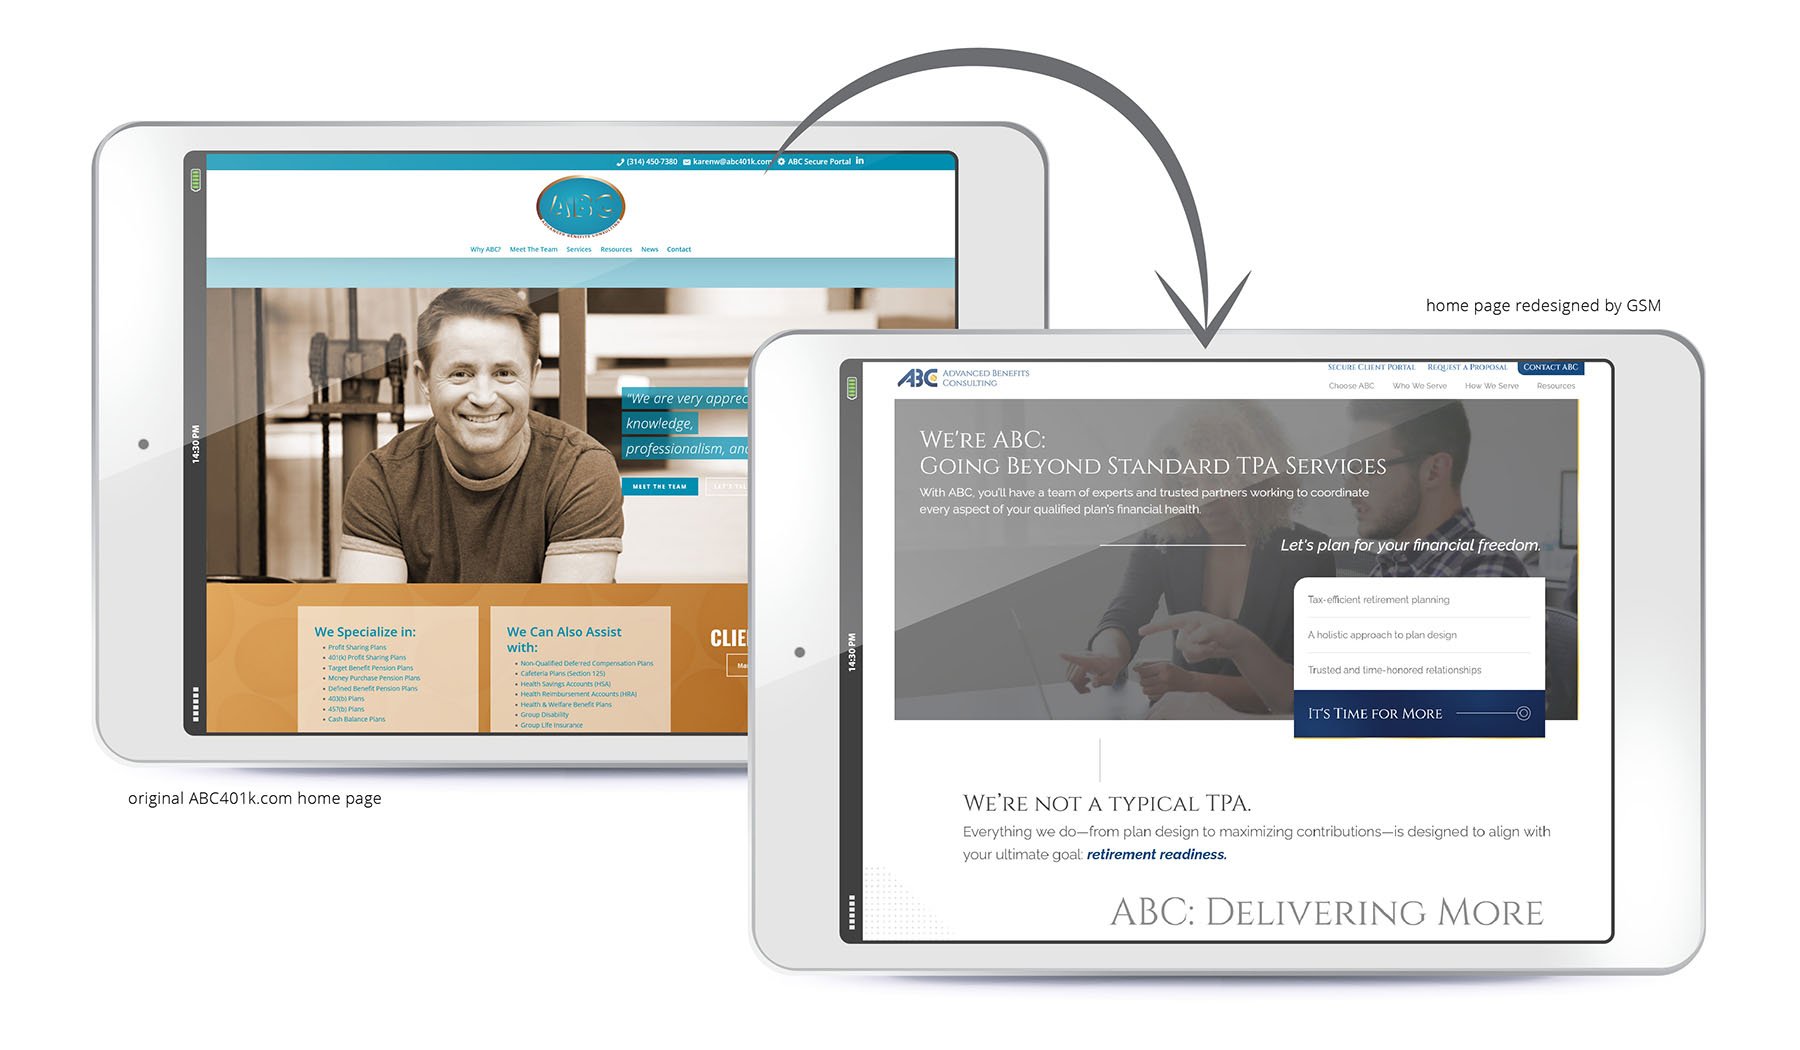 Before-and-after image illustrating the former ABC401k.com home page design and the new design